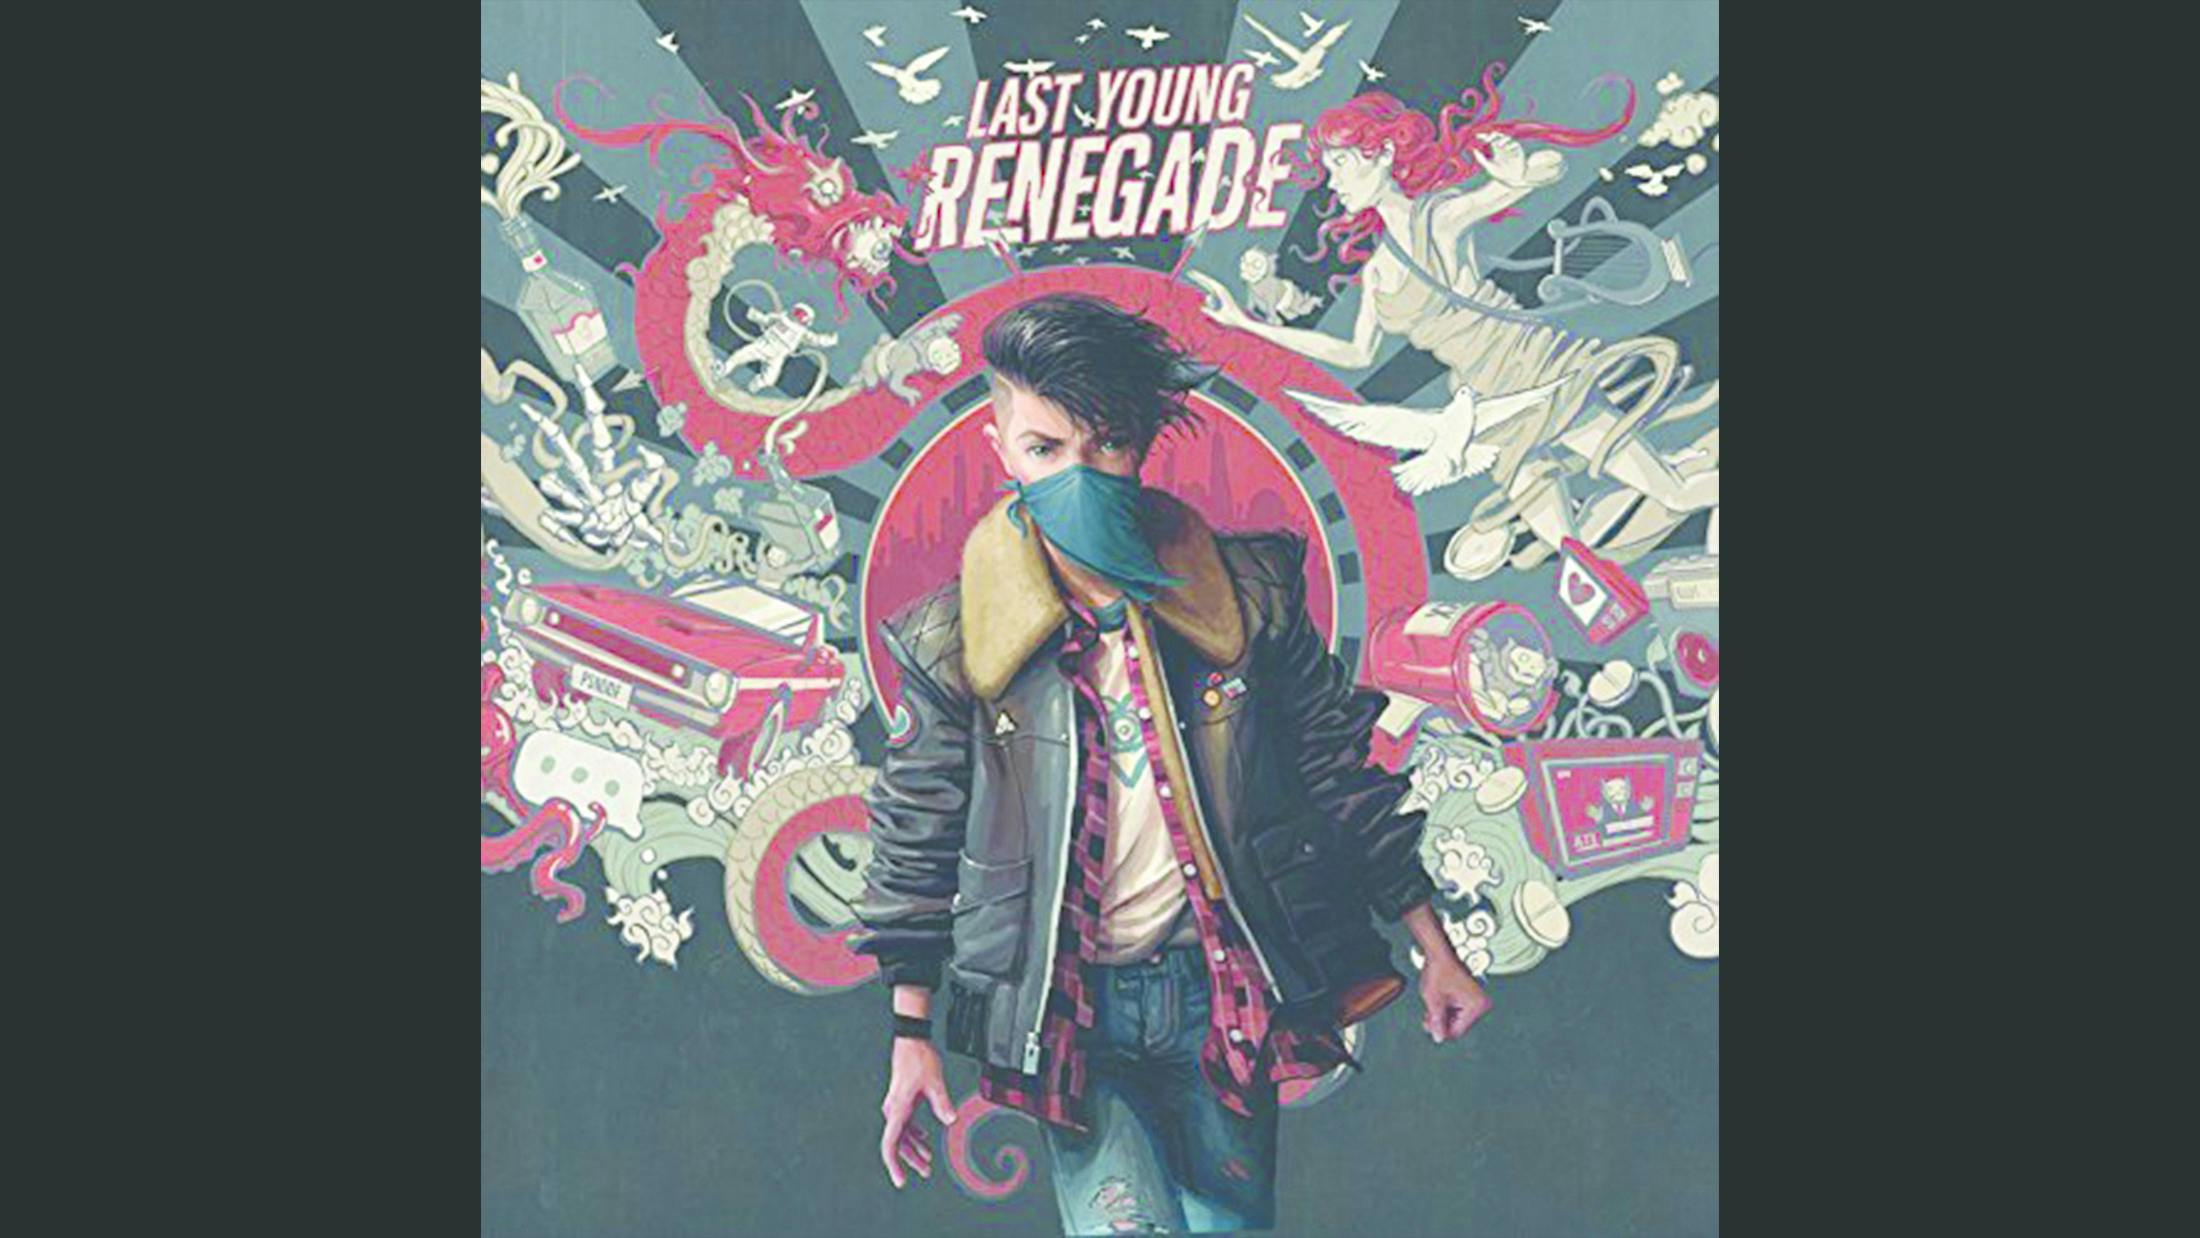 “It feels like the right time to put something forward that’s a little different,” Alex Gaskarth told K! ahead of Last Young Renegade’s release. Though there was some shiny, three-chord pop-punk, the album also found Baltimore’s finest playing with electronic sounds and more ambitious songwriting. “Mature” was how they described it to us. They were not wrong.